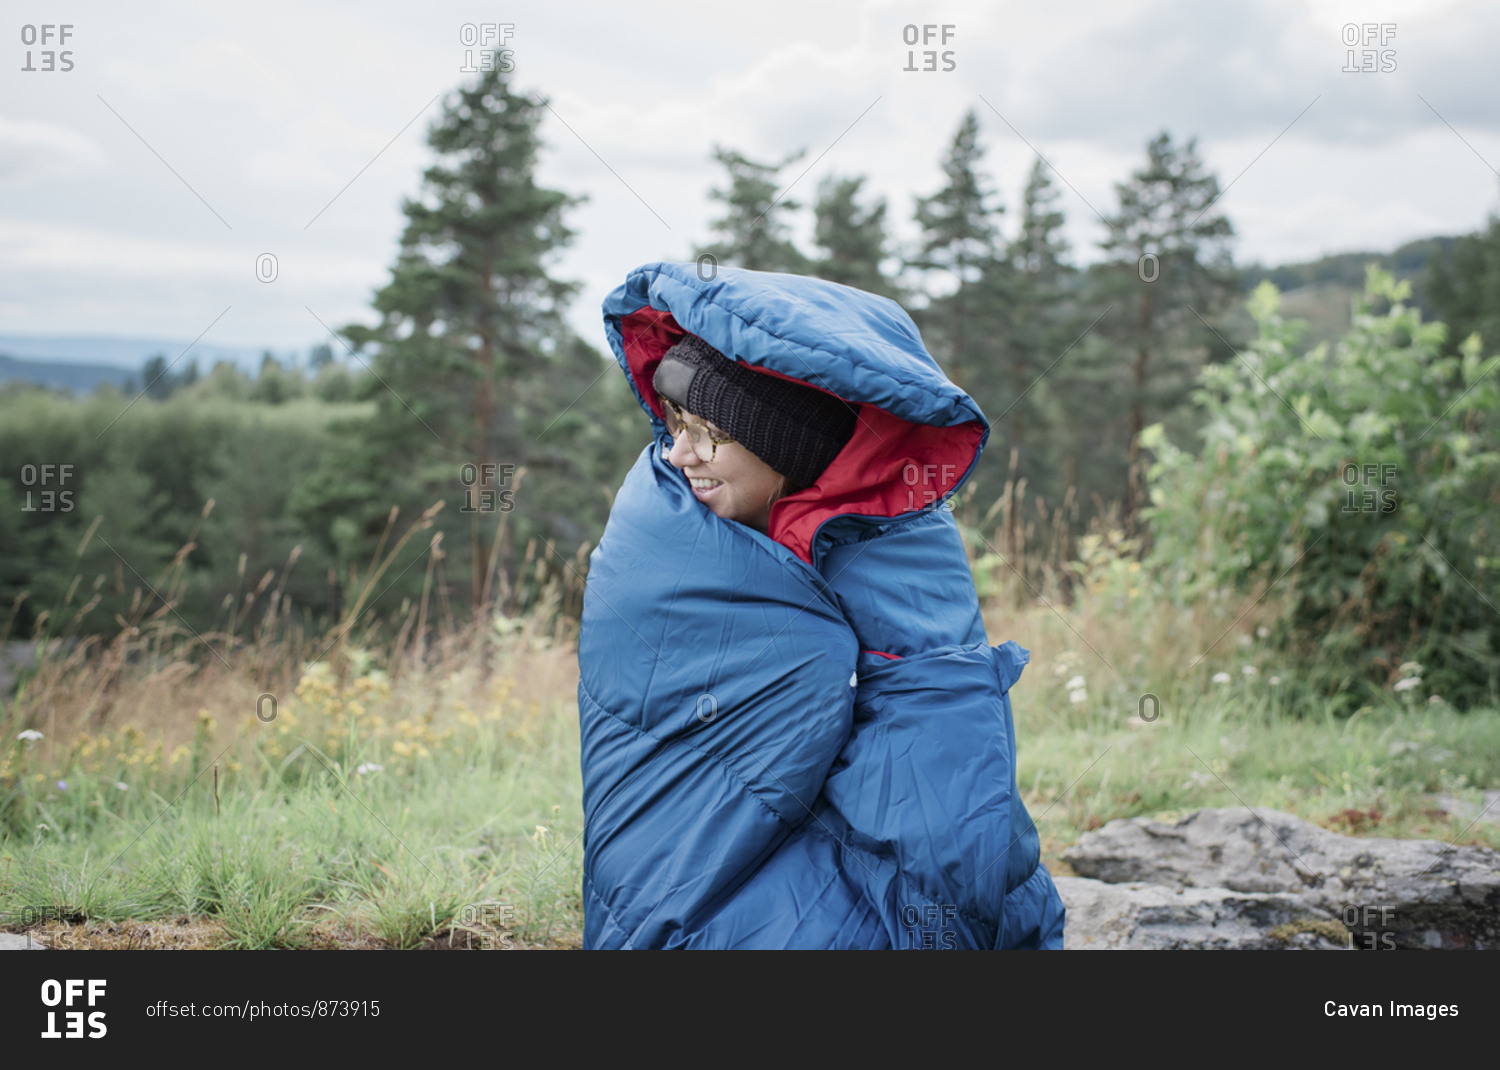 portrait of a woman wrapped in a sleeping bag whilst camping outdoors